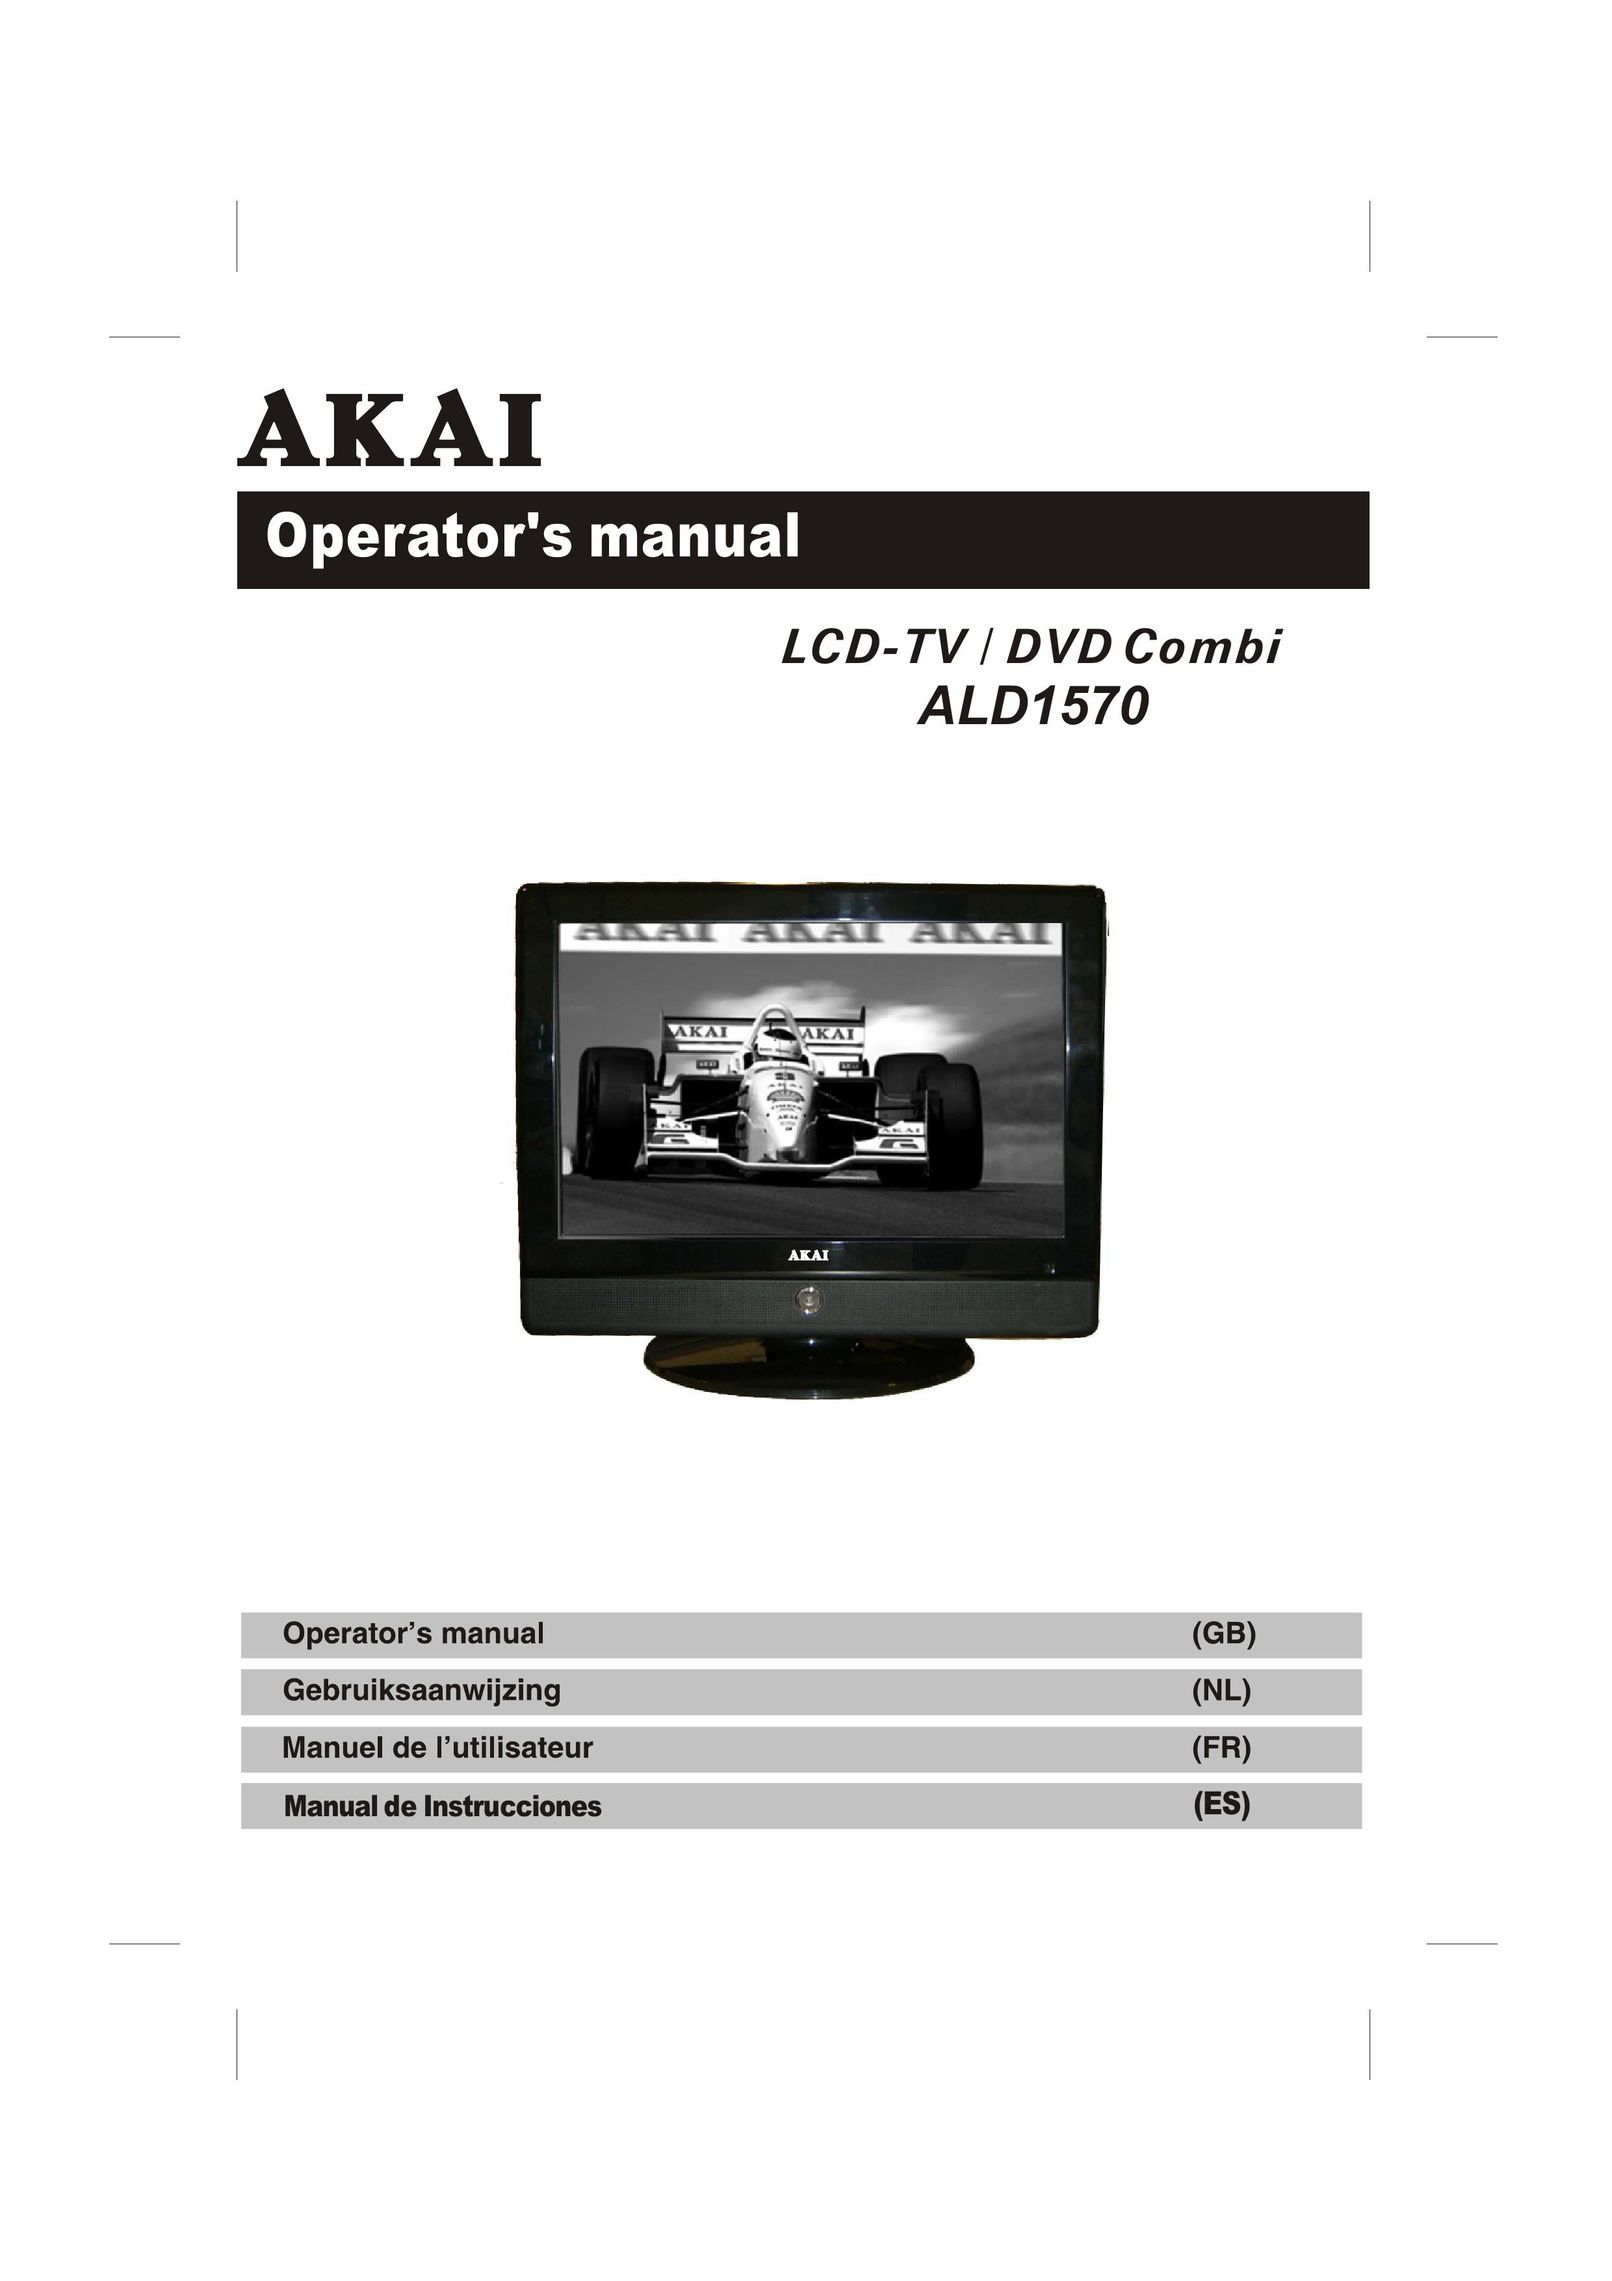 Akai ALD1570 Flat Panel Television User Manual (Page 1)